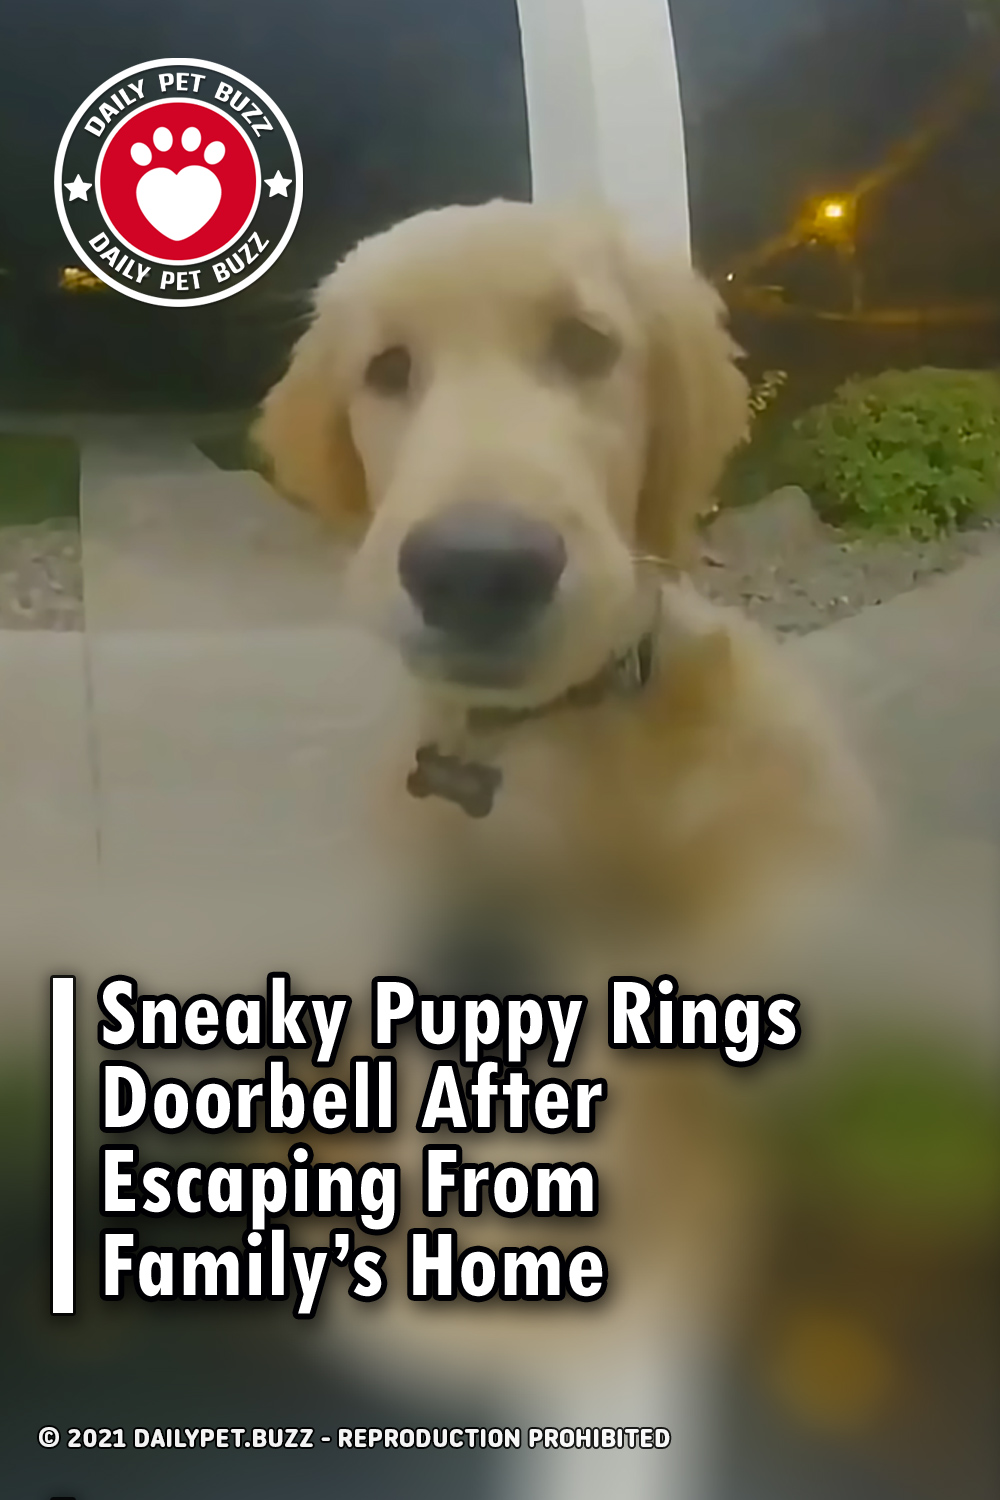 Sneaky Puppy Rings Doorbell After Escaping From Family’s Home